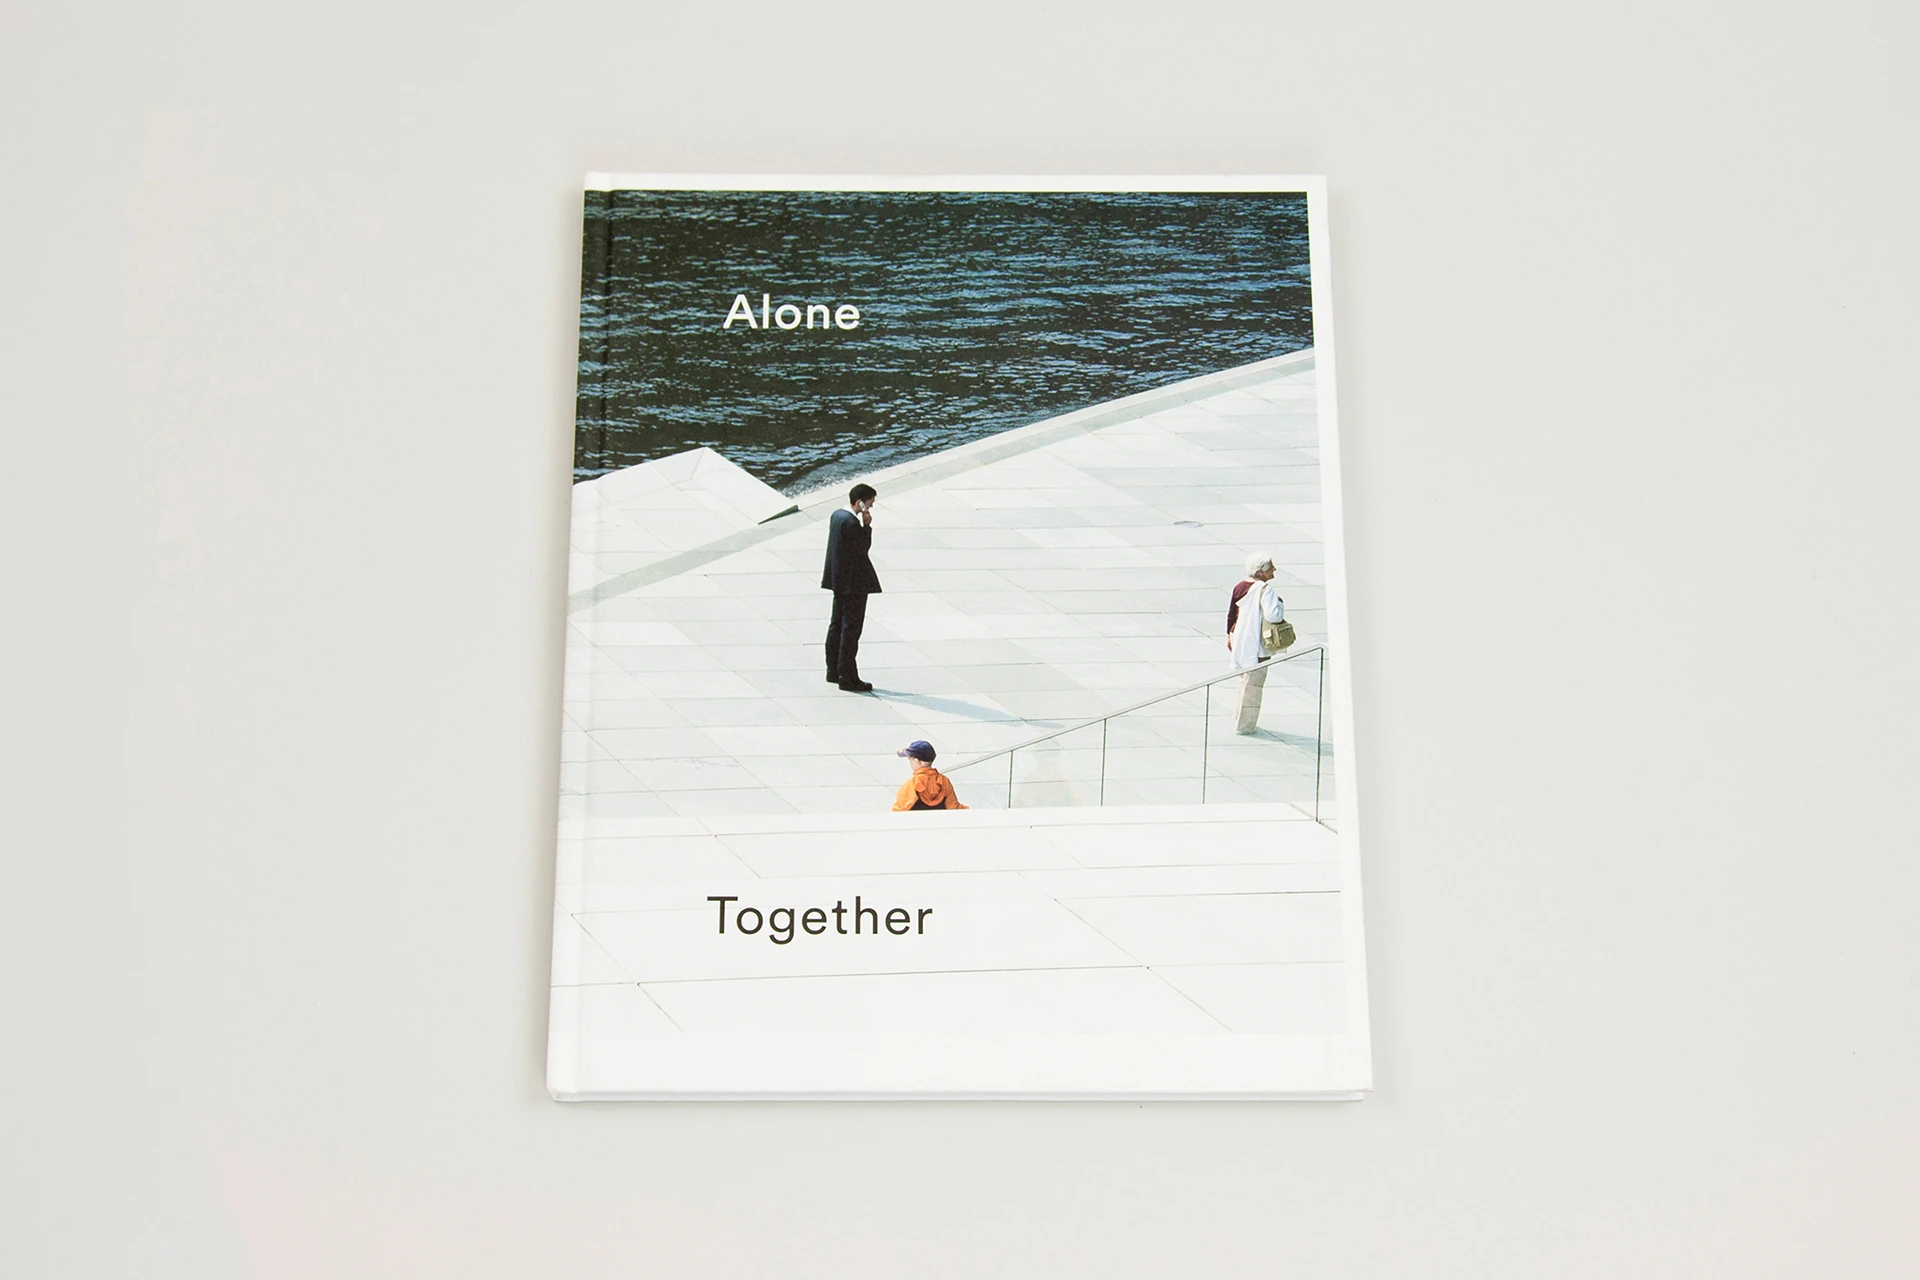 Alone Together - The Eriskay Connection